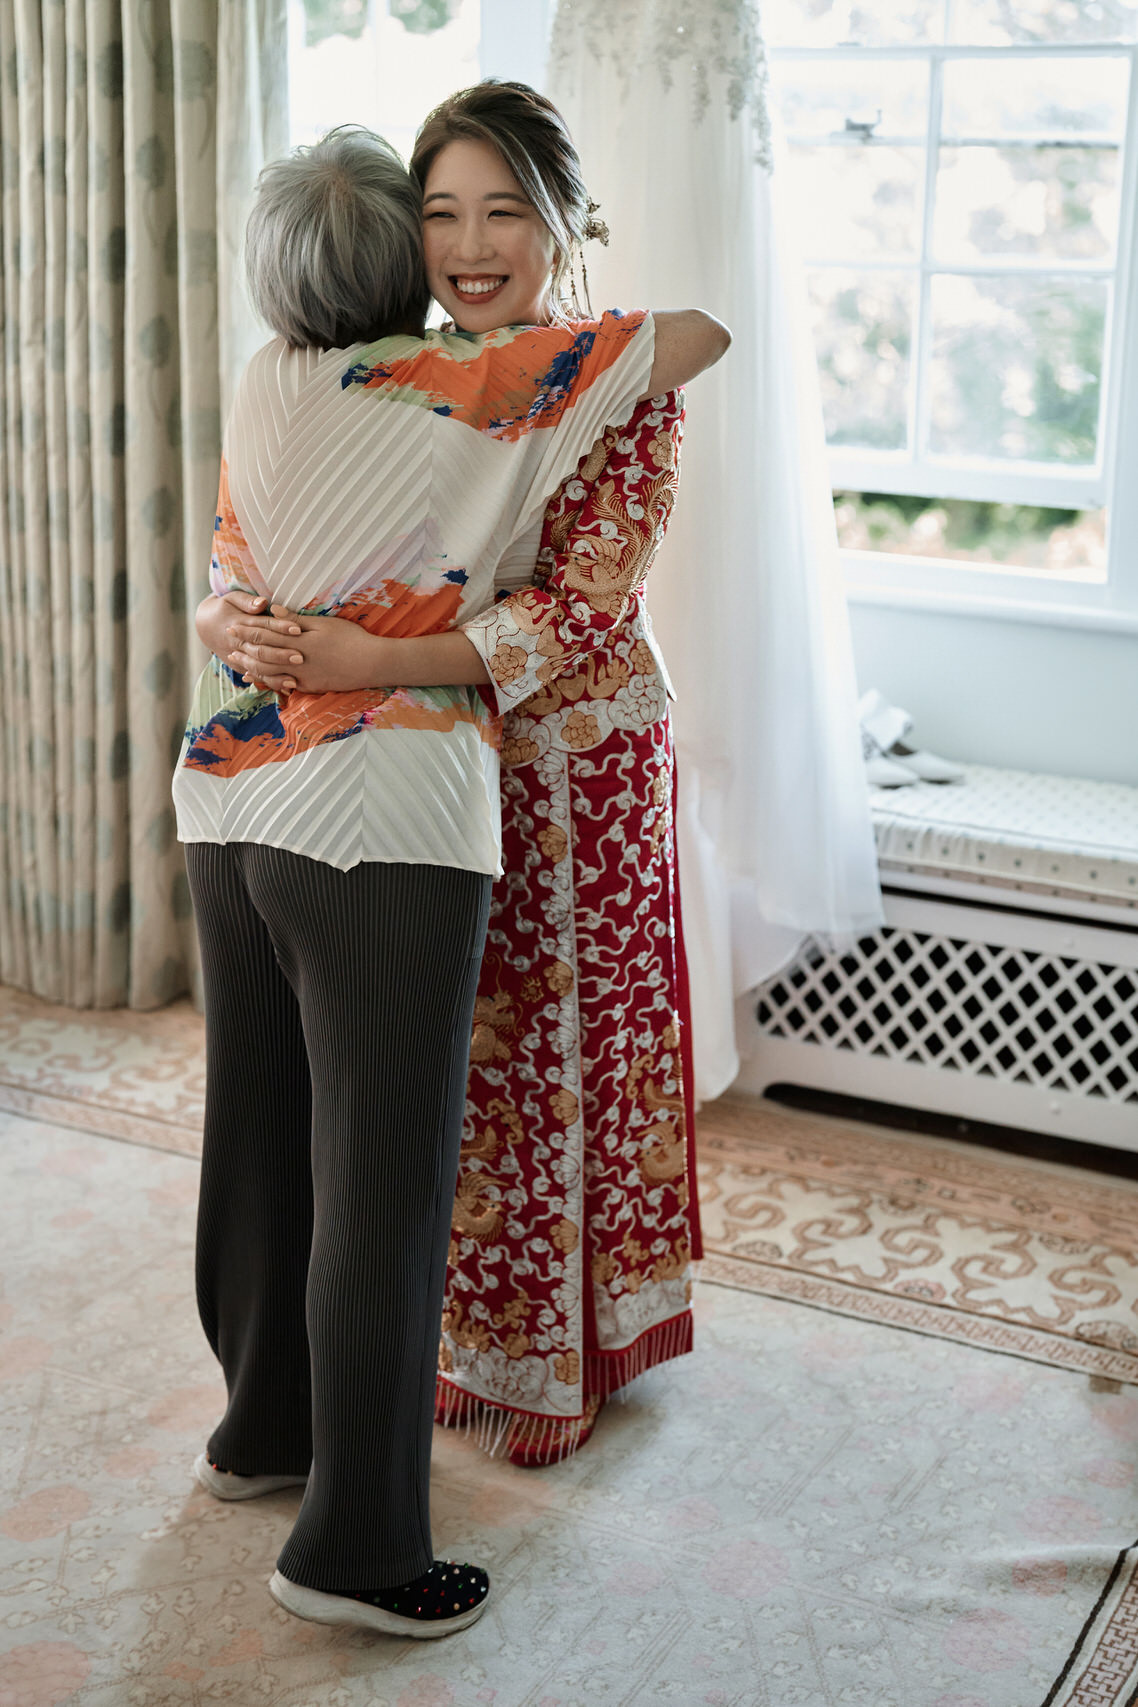 A bride and her mom are hugging in a room.